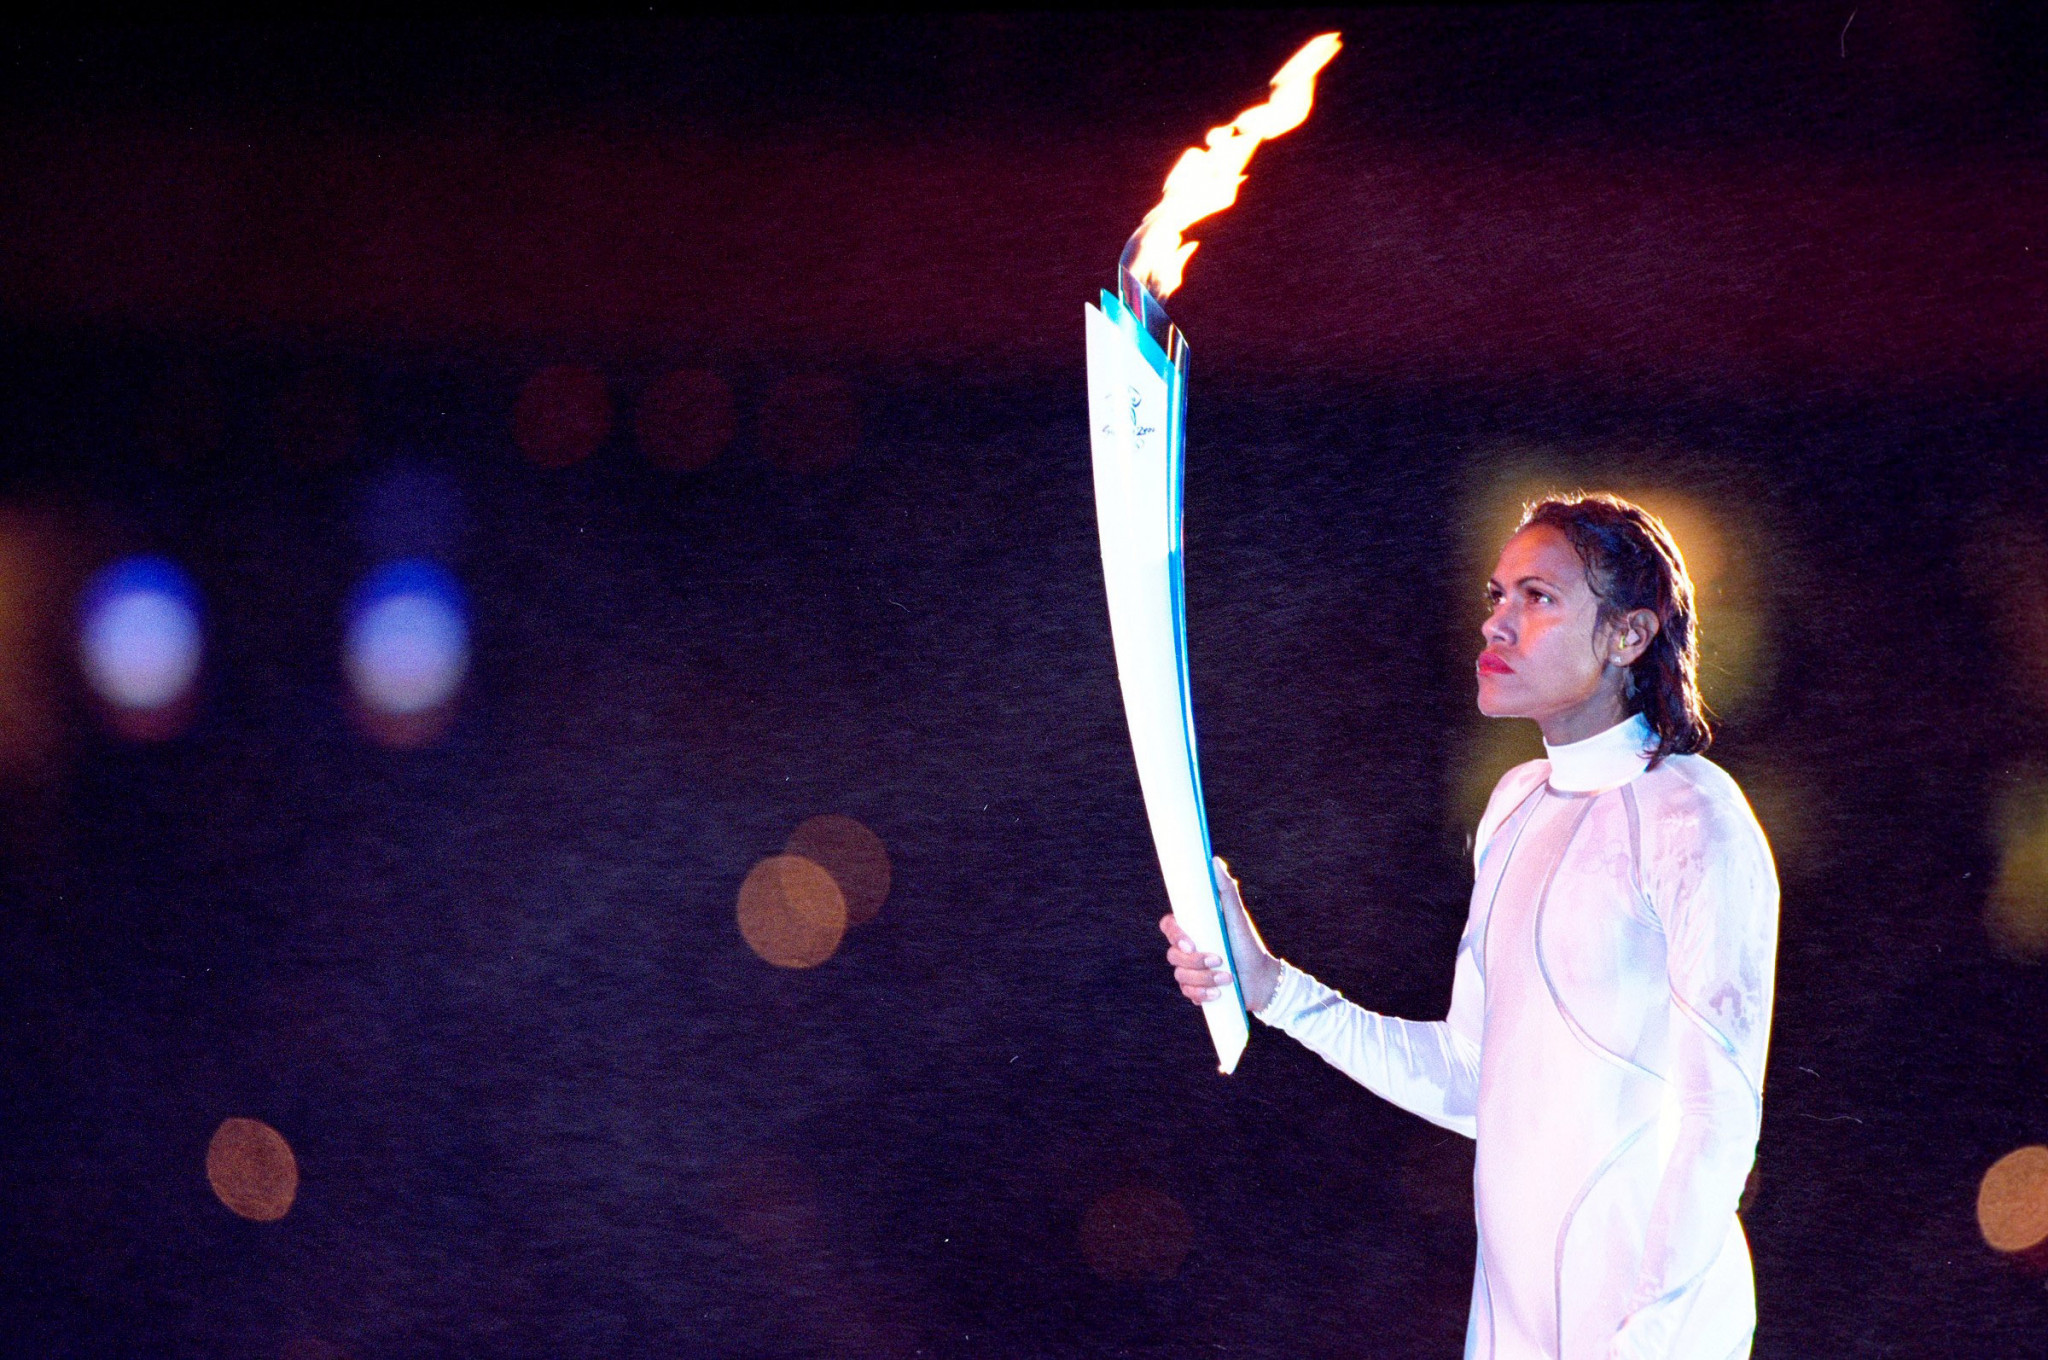 Australian 400 metres runner Cathy Freeman responded to a request from John Coates to light the flame at the Opening Ceremony of the 2000 Olympics in Sydney ©Getty Images